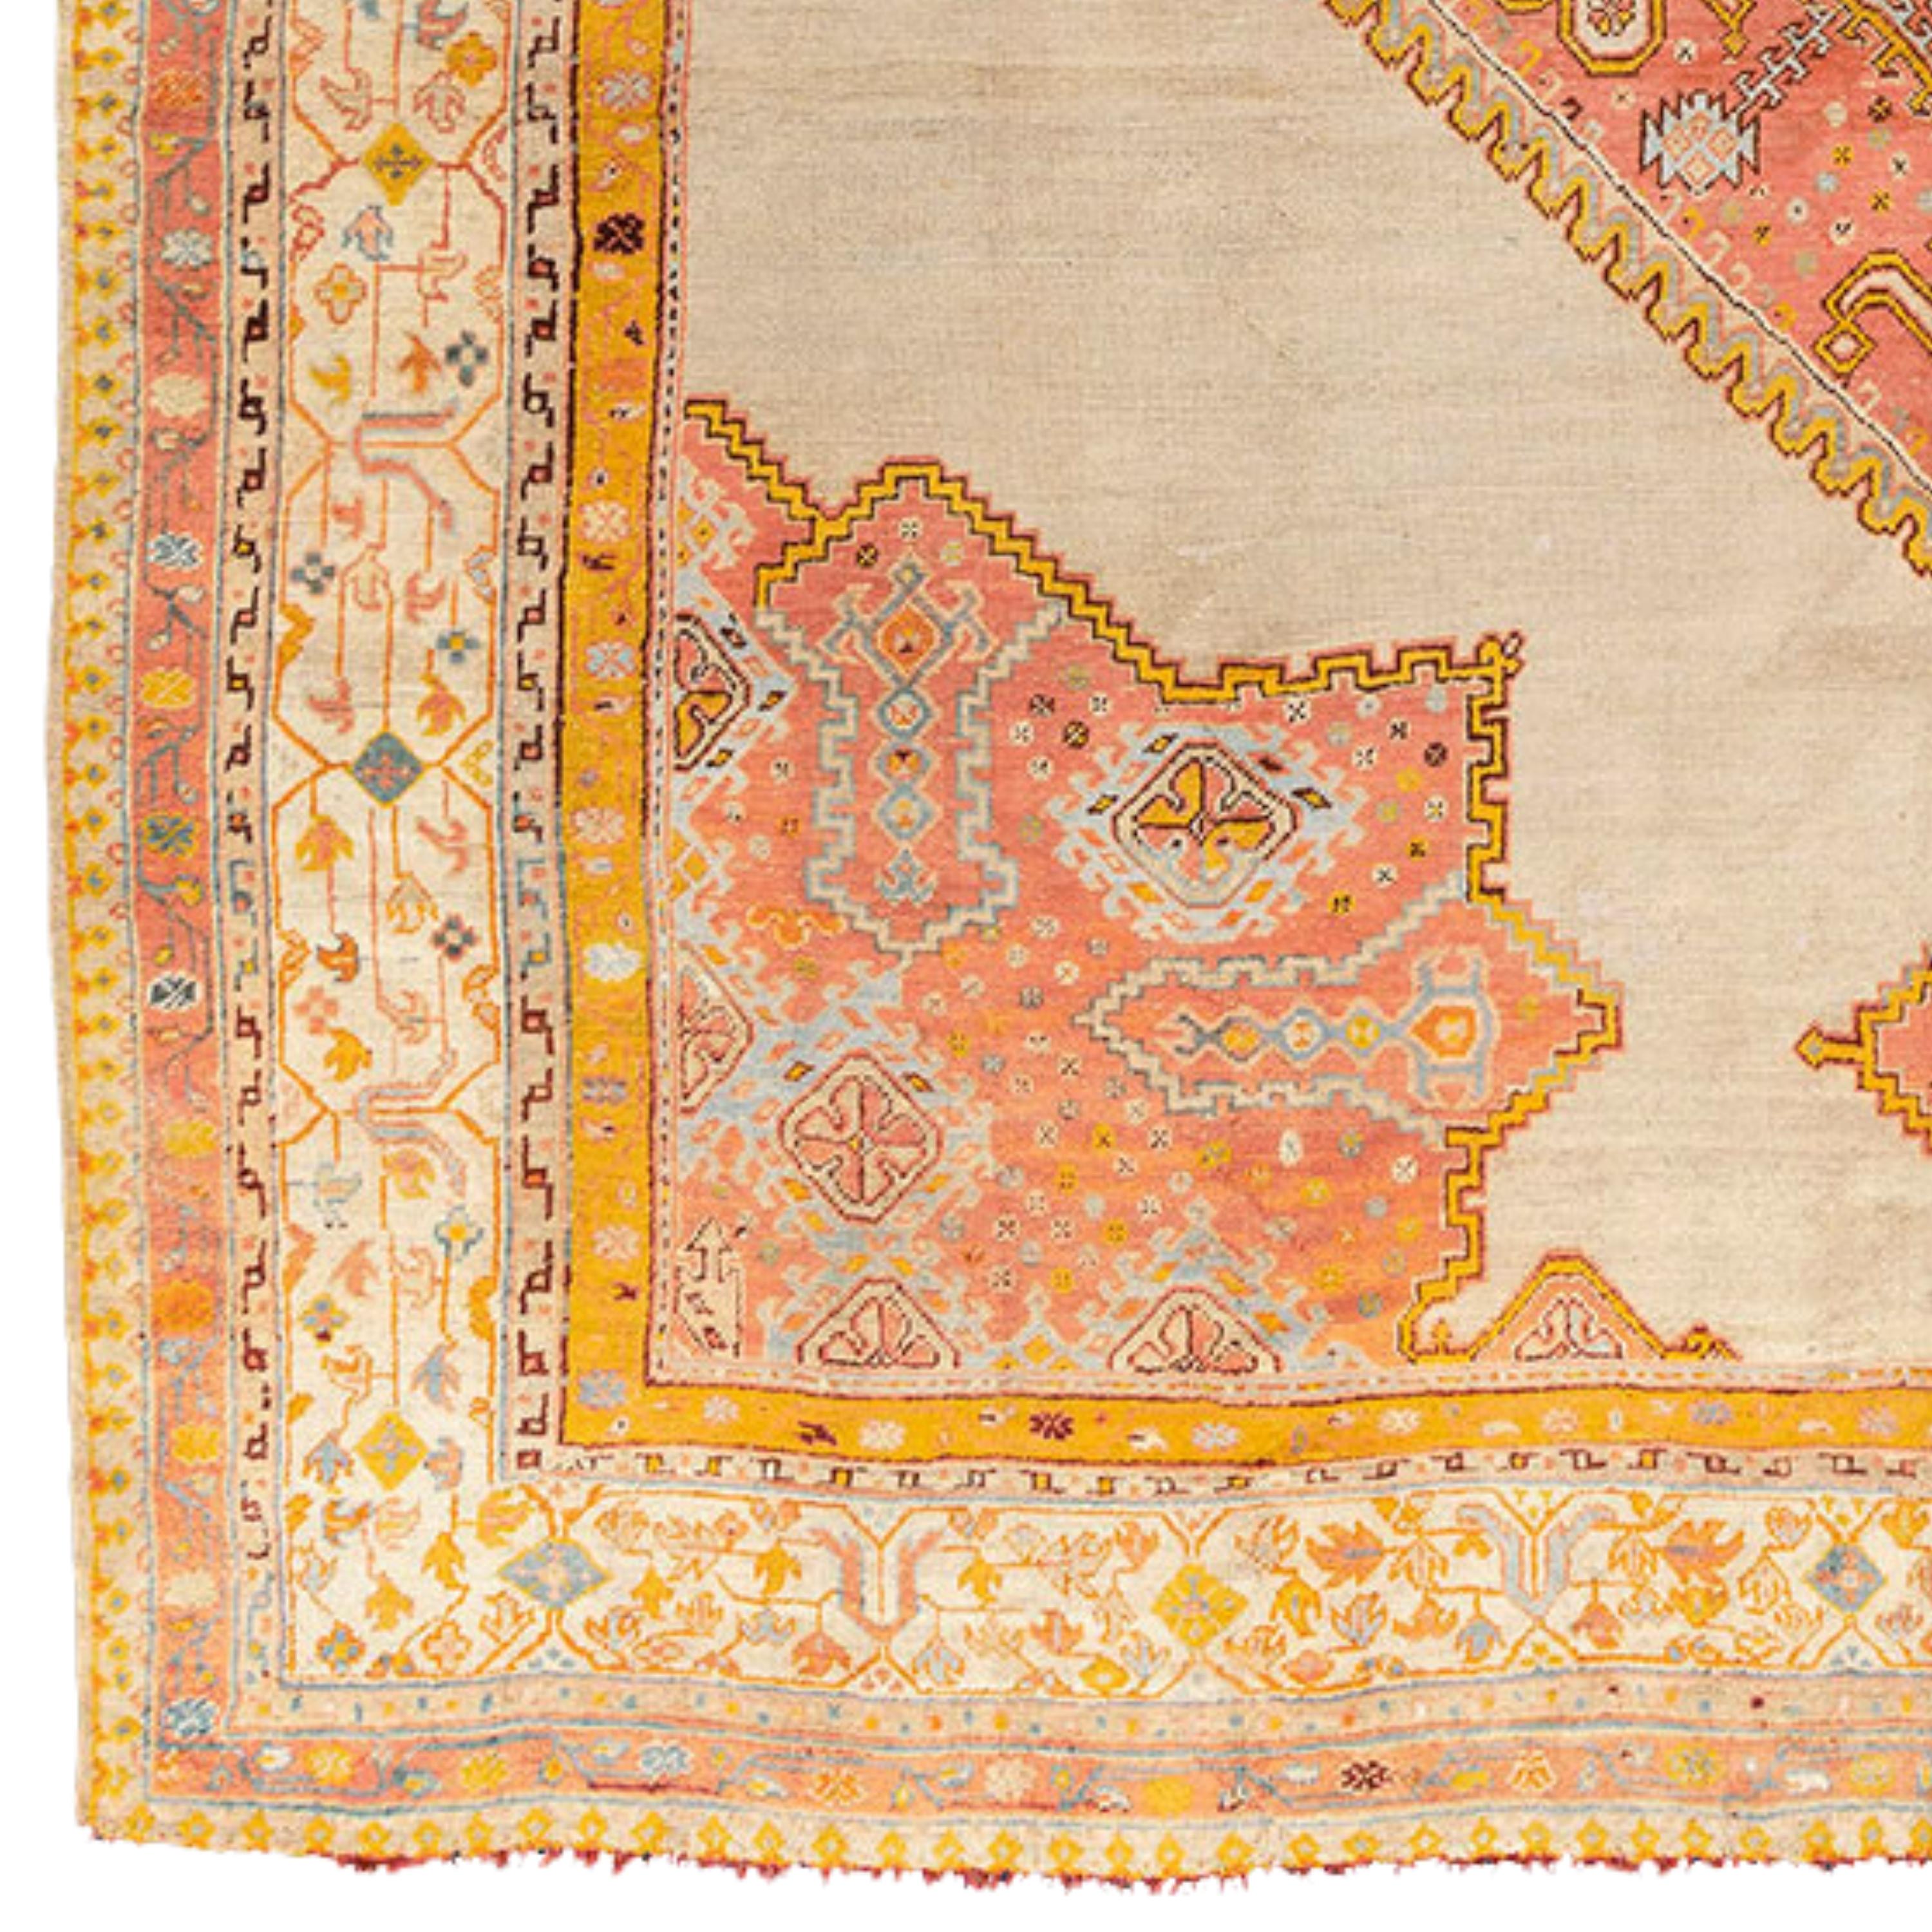 Large West Anatolia Ushak Rug Circa 1800’s

A large white-ground Ushak workshop carpet produced for export. Popular in Europa and the USA ca. 1800, carpets of this kind are usually of coarse weave. Their simply drawn designs – here including a